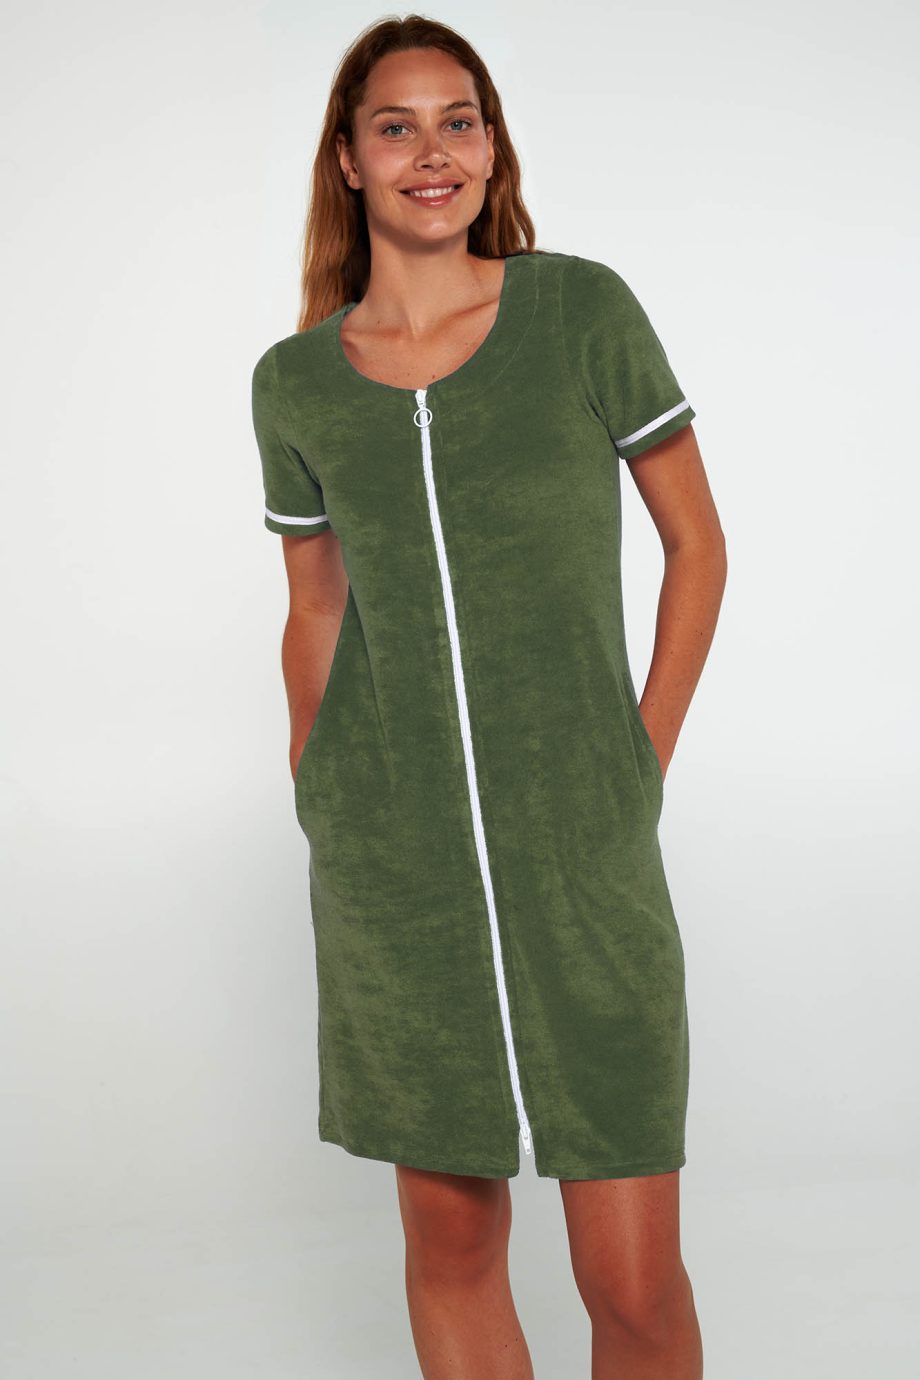 Plain Frottee Dress with Short Sleeves